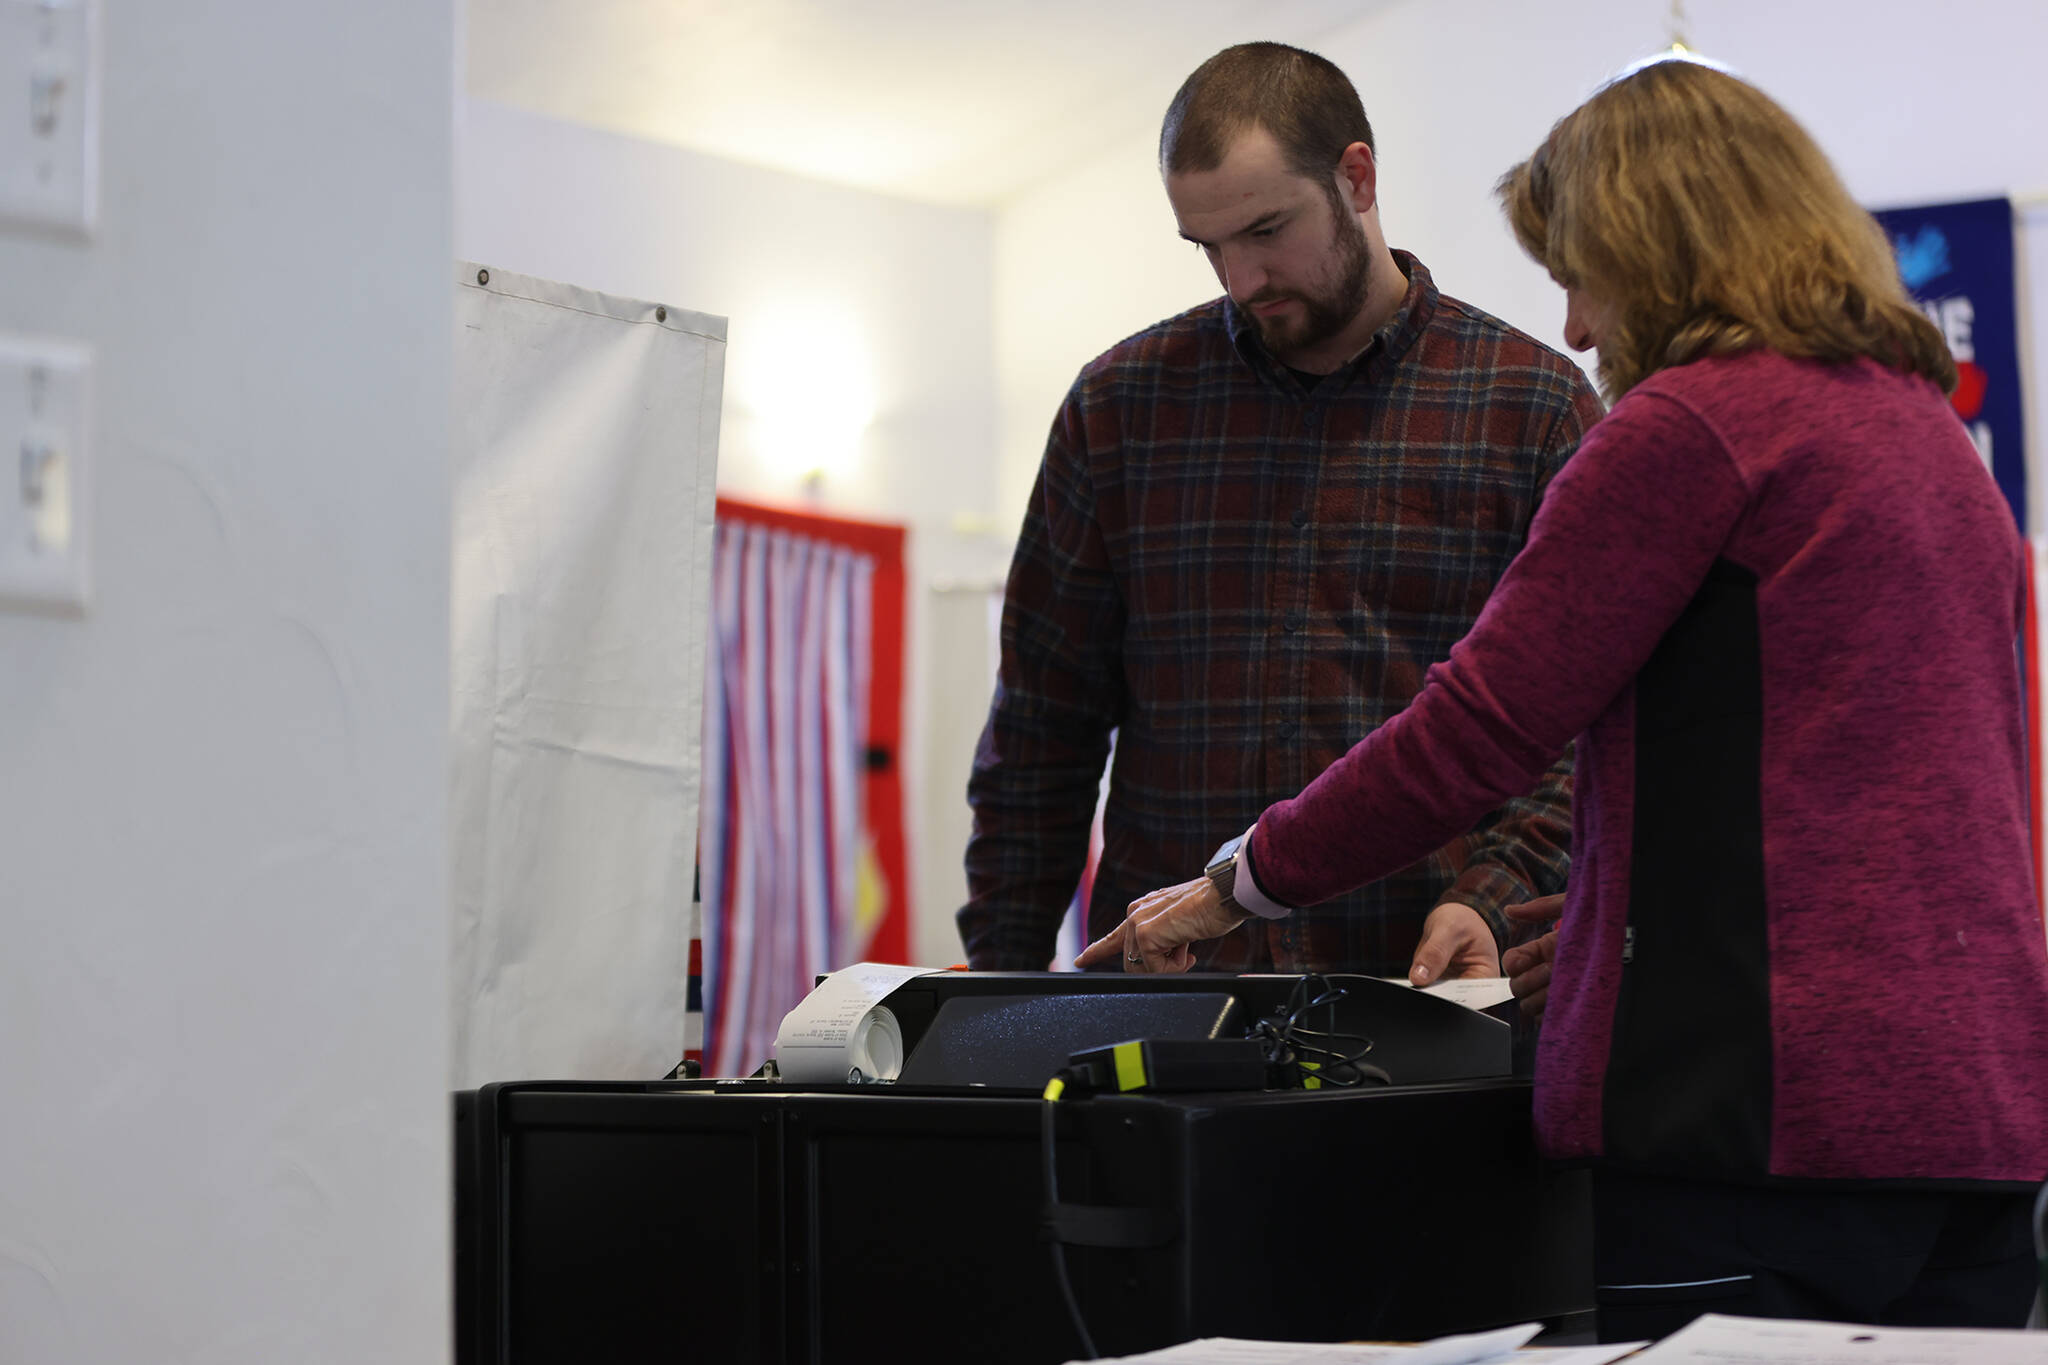 Michael Blackwell watches the screen on the voting machine while poll worker Peggy Cowarn gestures toward the portion whether the ballot has been accepted. (Ben Hohesntatt / Juneau Empire)